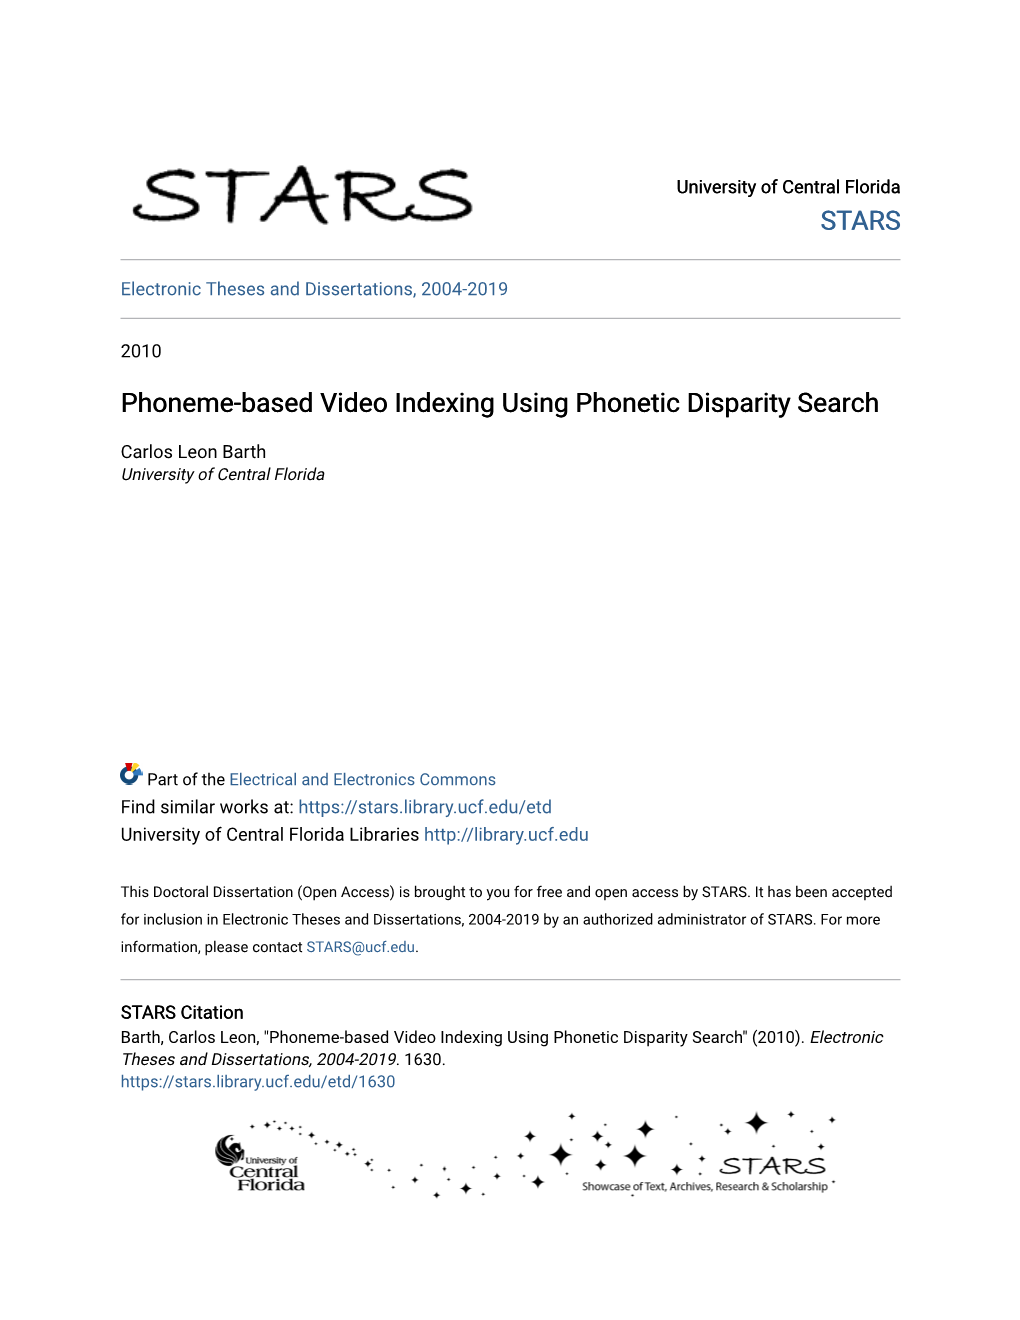 Phoneme-Based Video Indexing Using Phonetic Disparity Search